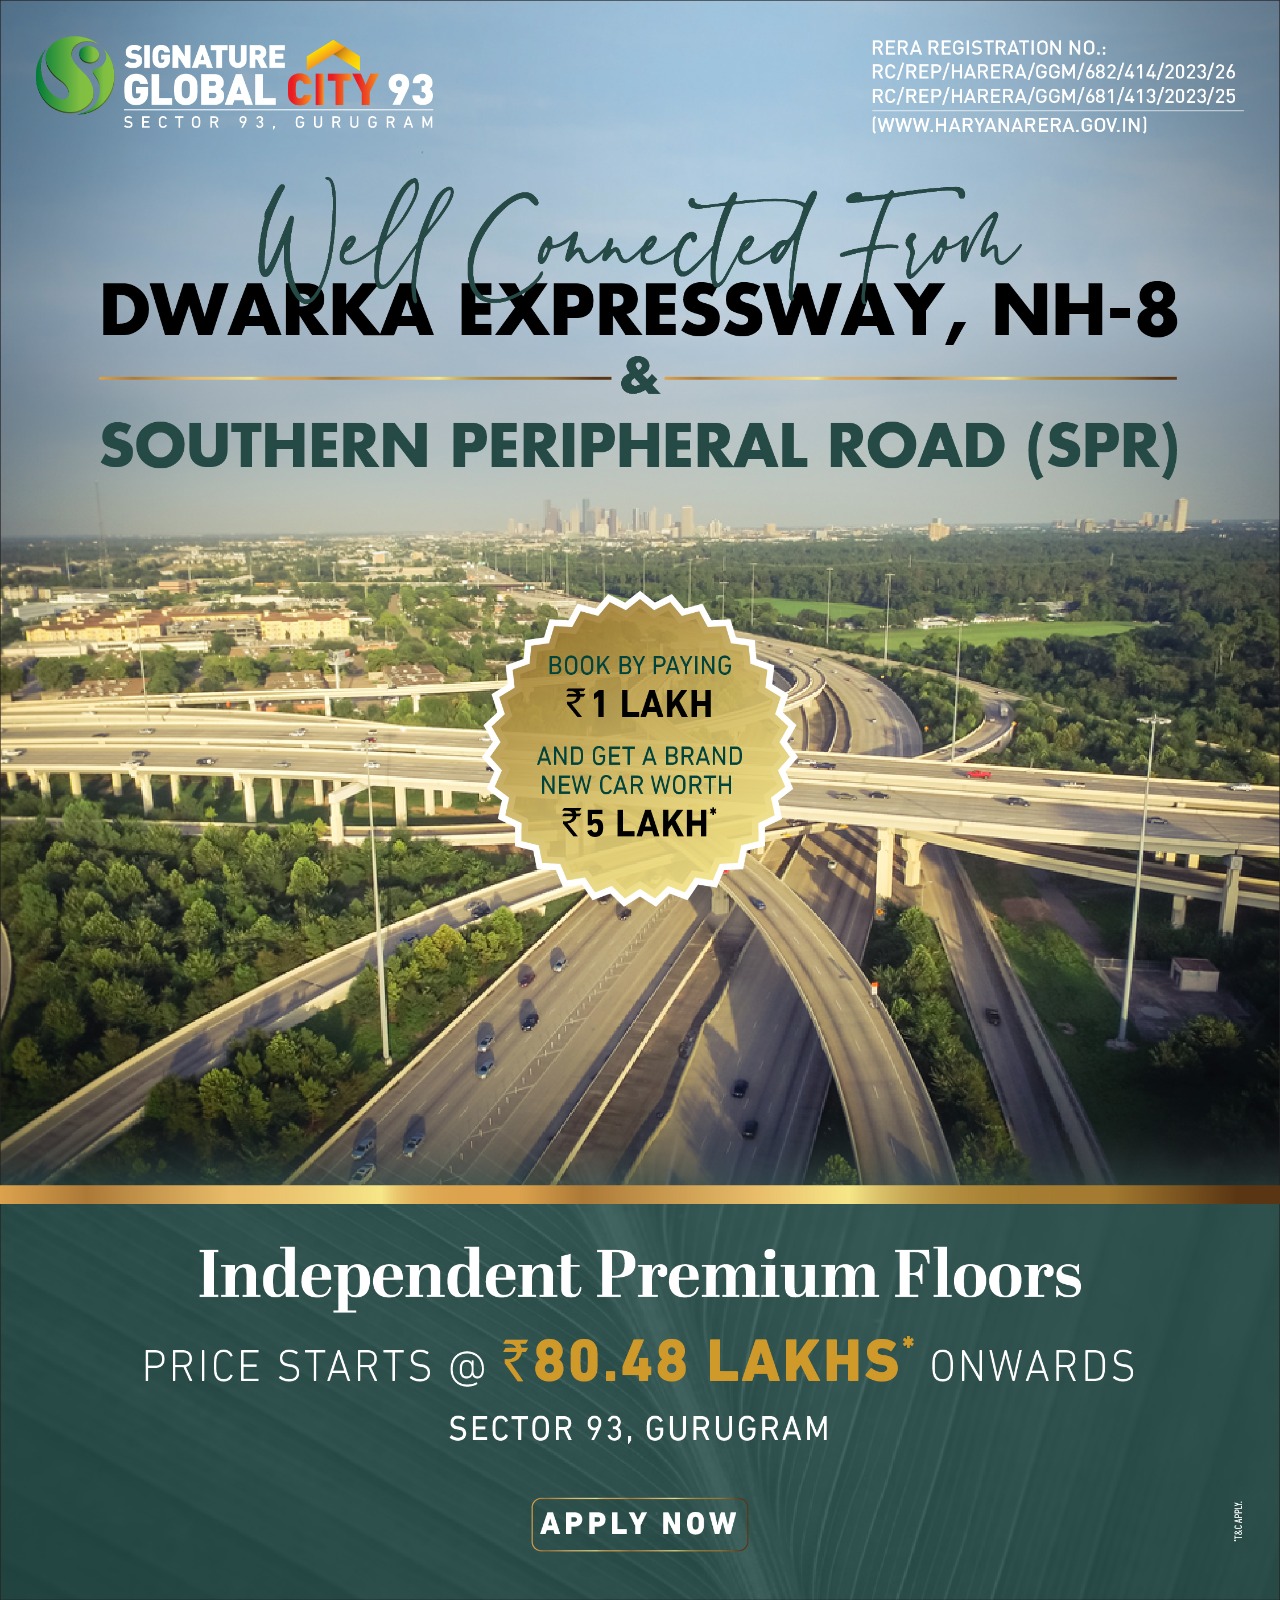 Connectivity to major highways & key areas. 2, 3, 3 BHK+ Study independent premium floors at Signature Global City 93, Gurgaon